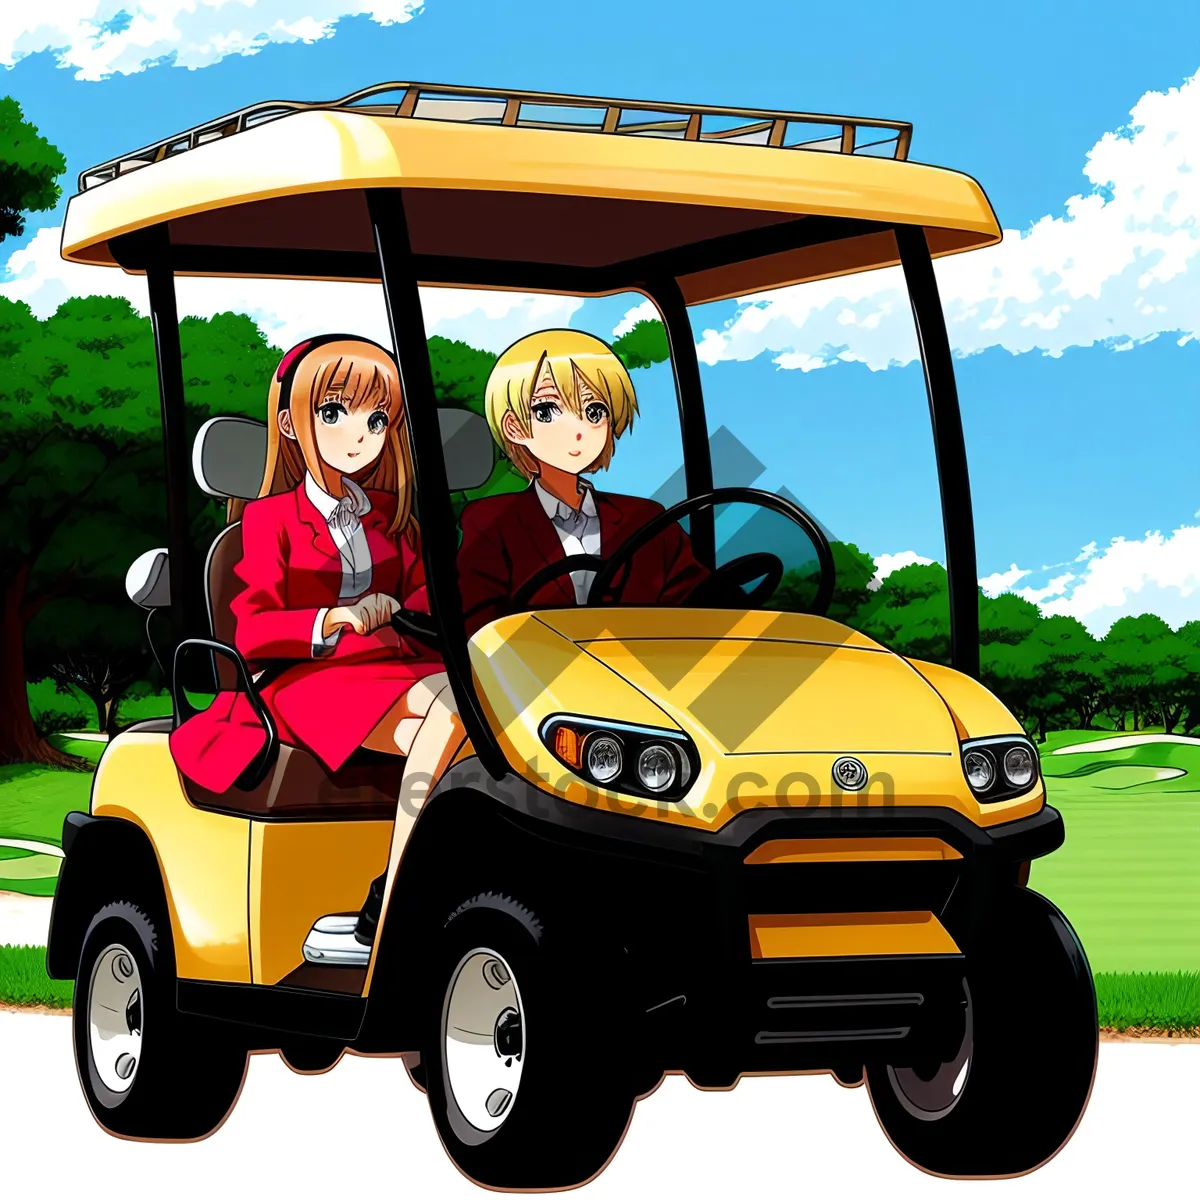 Picture of Outdoor Golf Cart - Sports Transportation on Grass